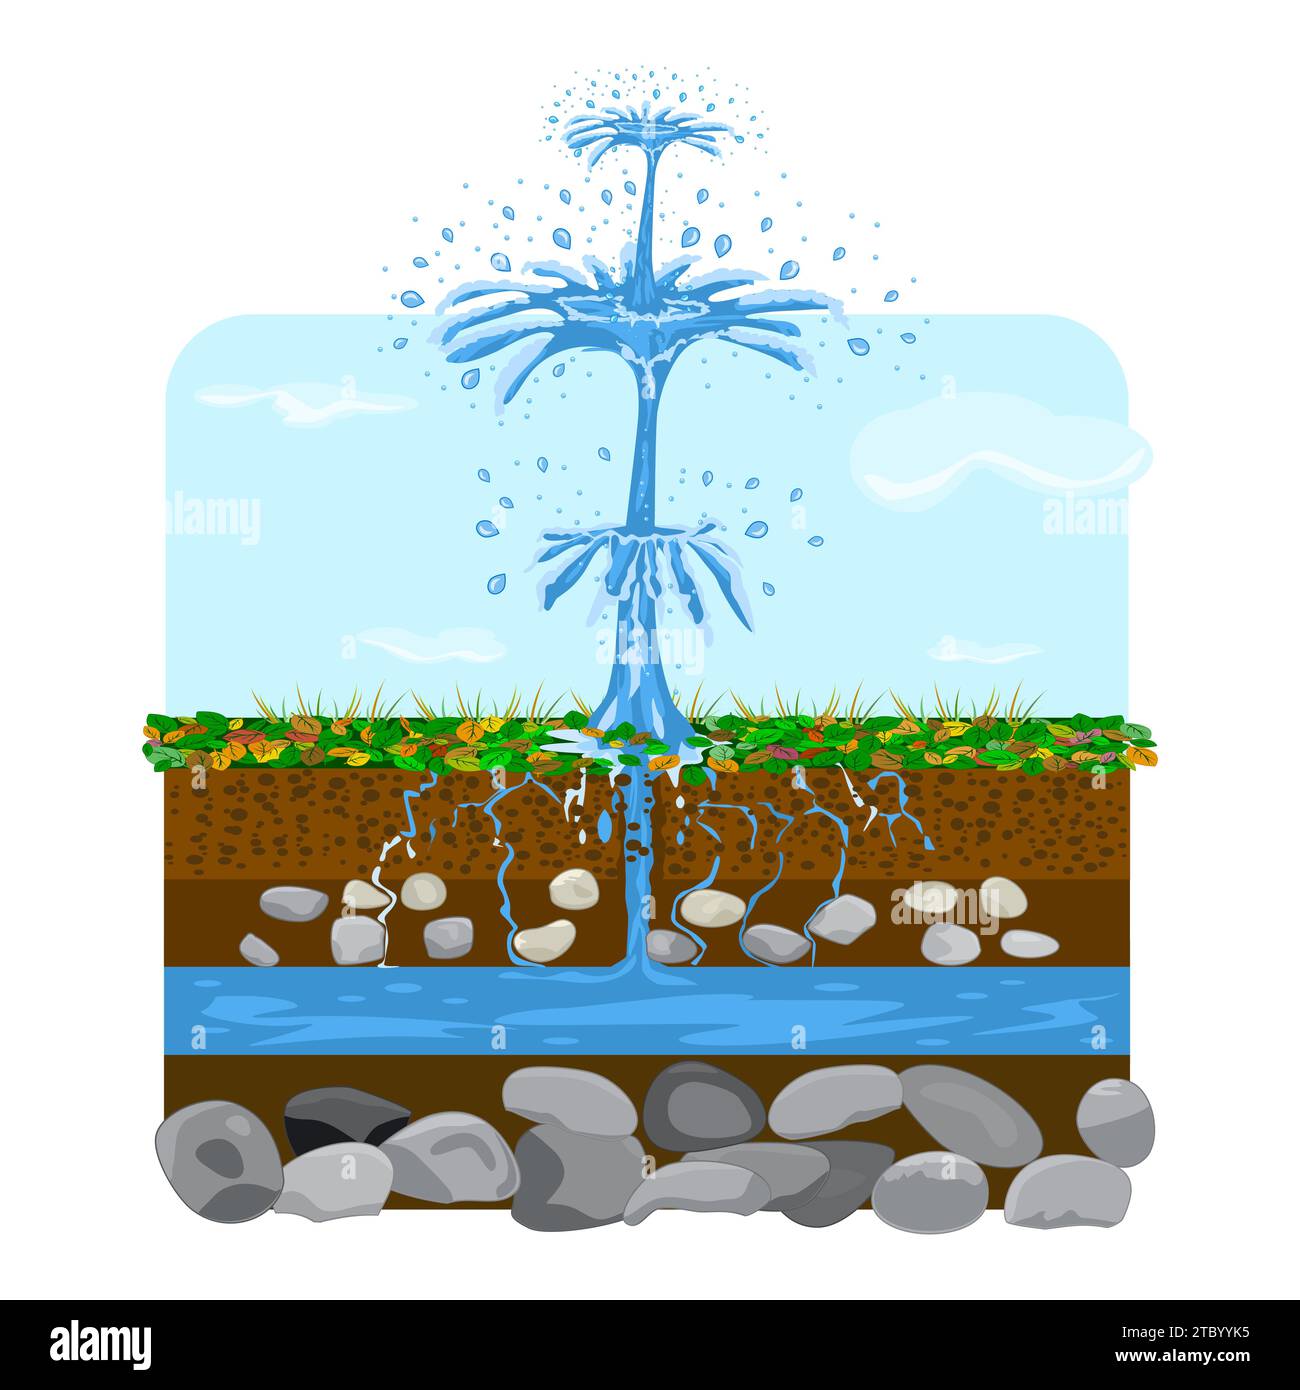 Artesian aquifer. Underground water resources. Source water fountain or geyser springing out of ground. Groundwater and soil layers. Water extraction. Stock Vector